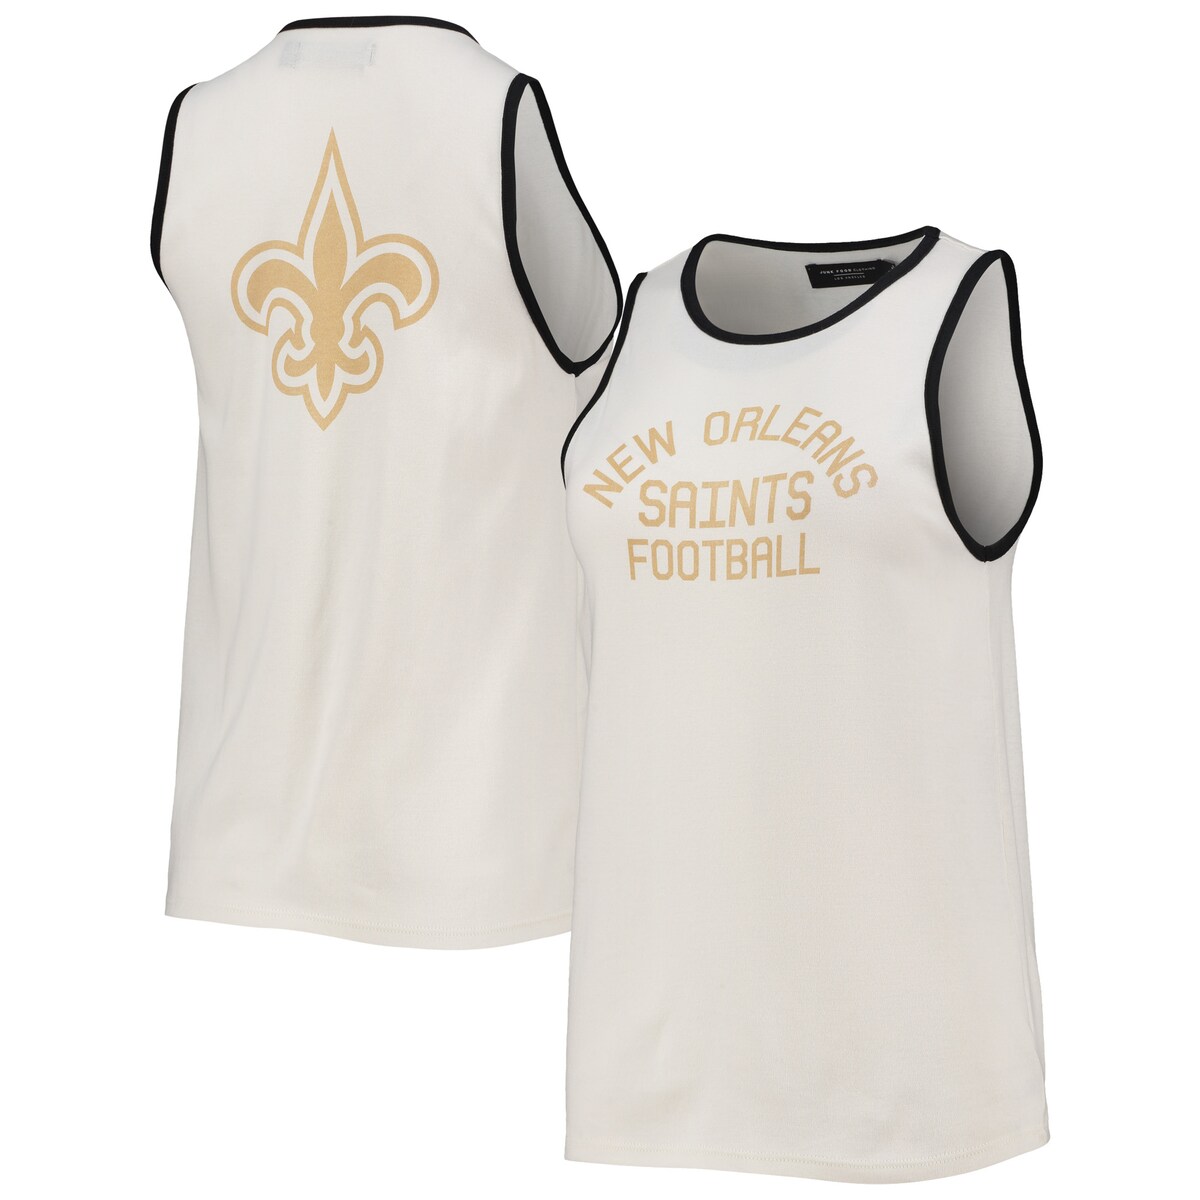 Beat the heat in throwback New Orleans Saints fashion with this Pop Binding tank top from Junk Food. It features eye-catching contrast-color piping that draws attention to the vintage New Orleans Saints graphics across the chest. In addition, its relaxing scoop neck design offers a comfortable fit and a classic warm-weather look.ImportedMachine wash, tumble dry lowOfficially licensedScreen print graphicsBrand: Junk FoodMaterial: 100% CottonContrast-color pipingSleeveless